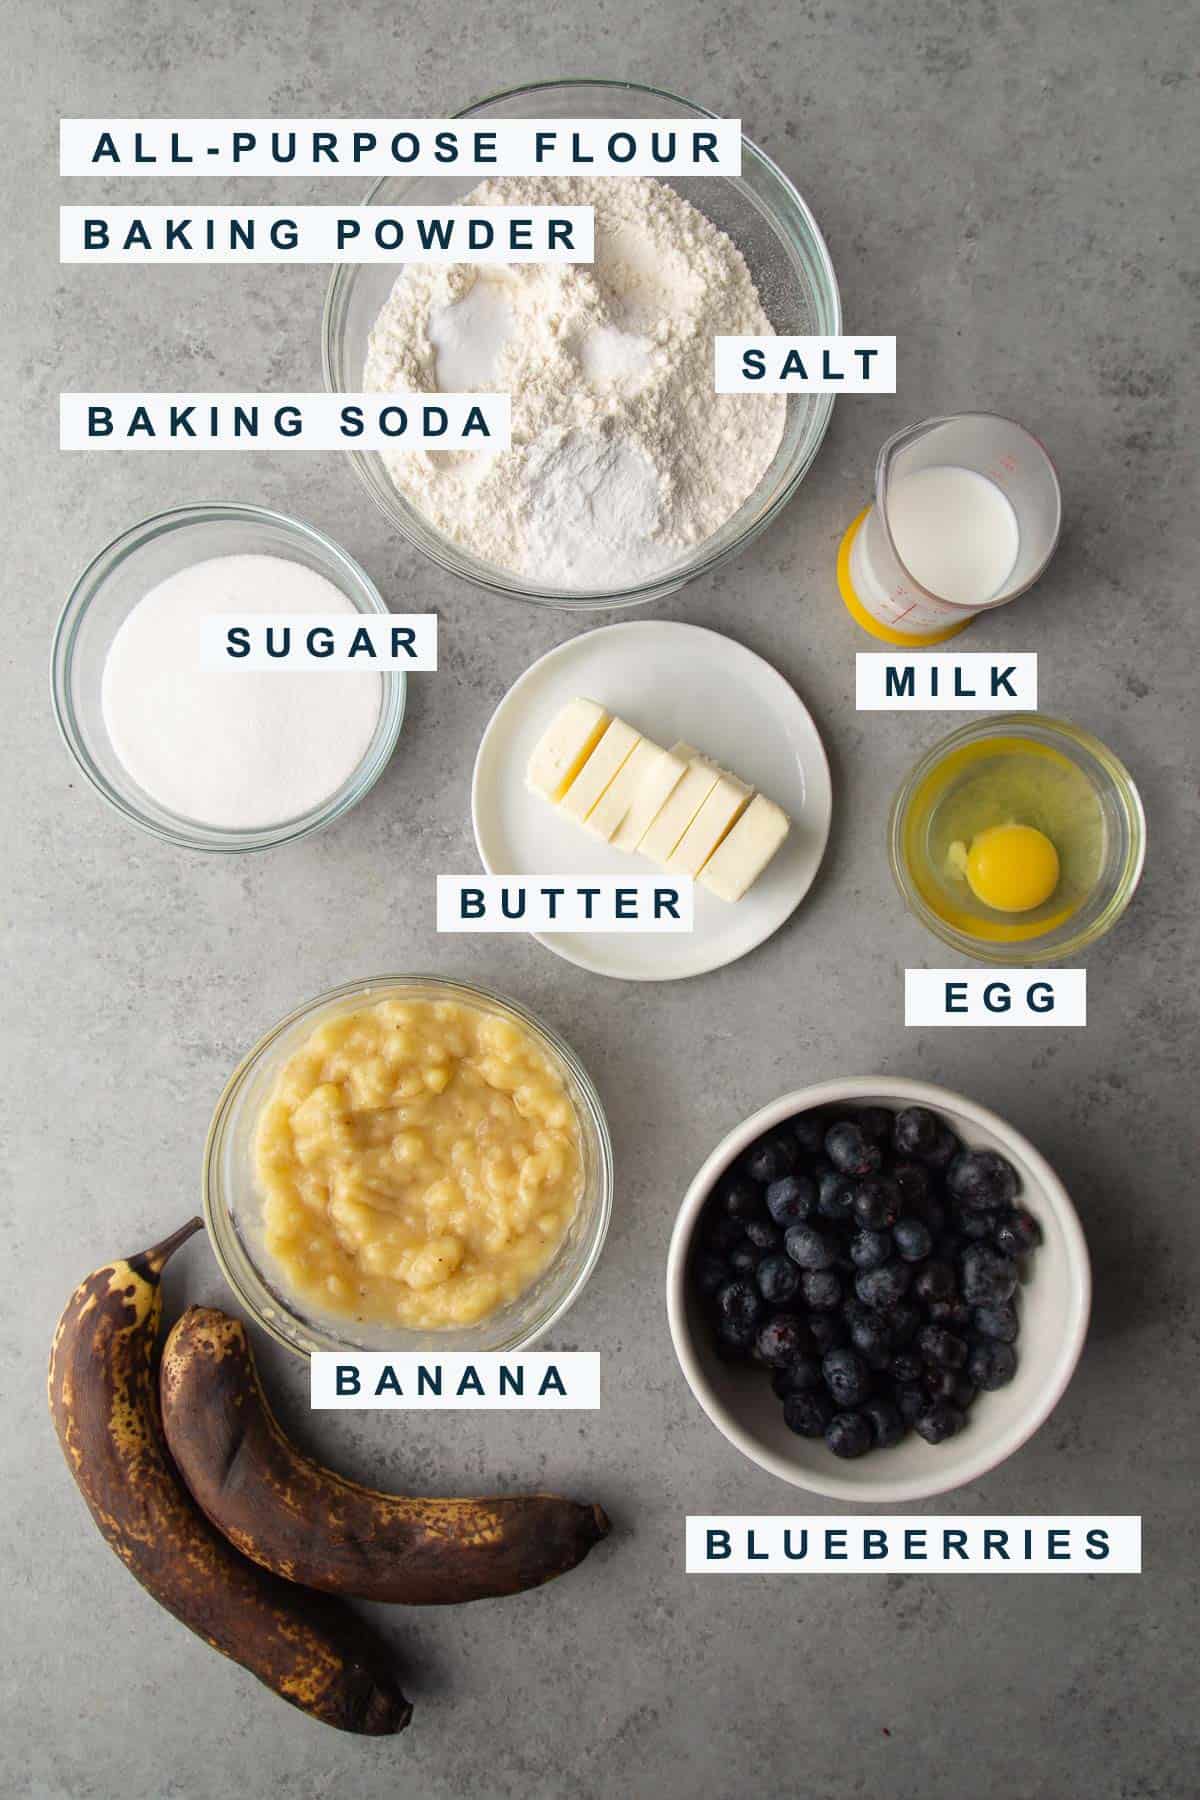 ingredients needed for banana blueberry muffins include flour, butter, sugar, and egg. 